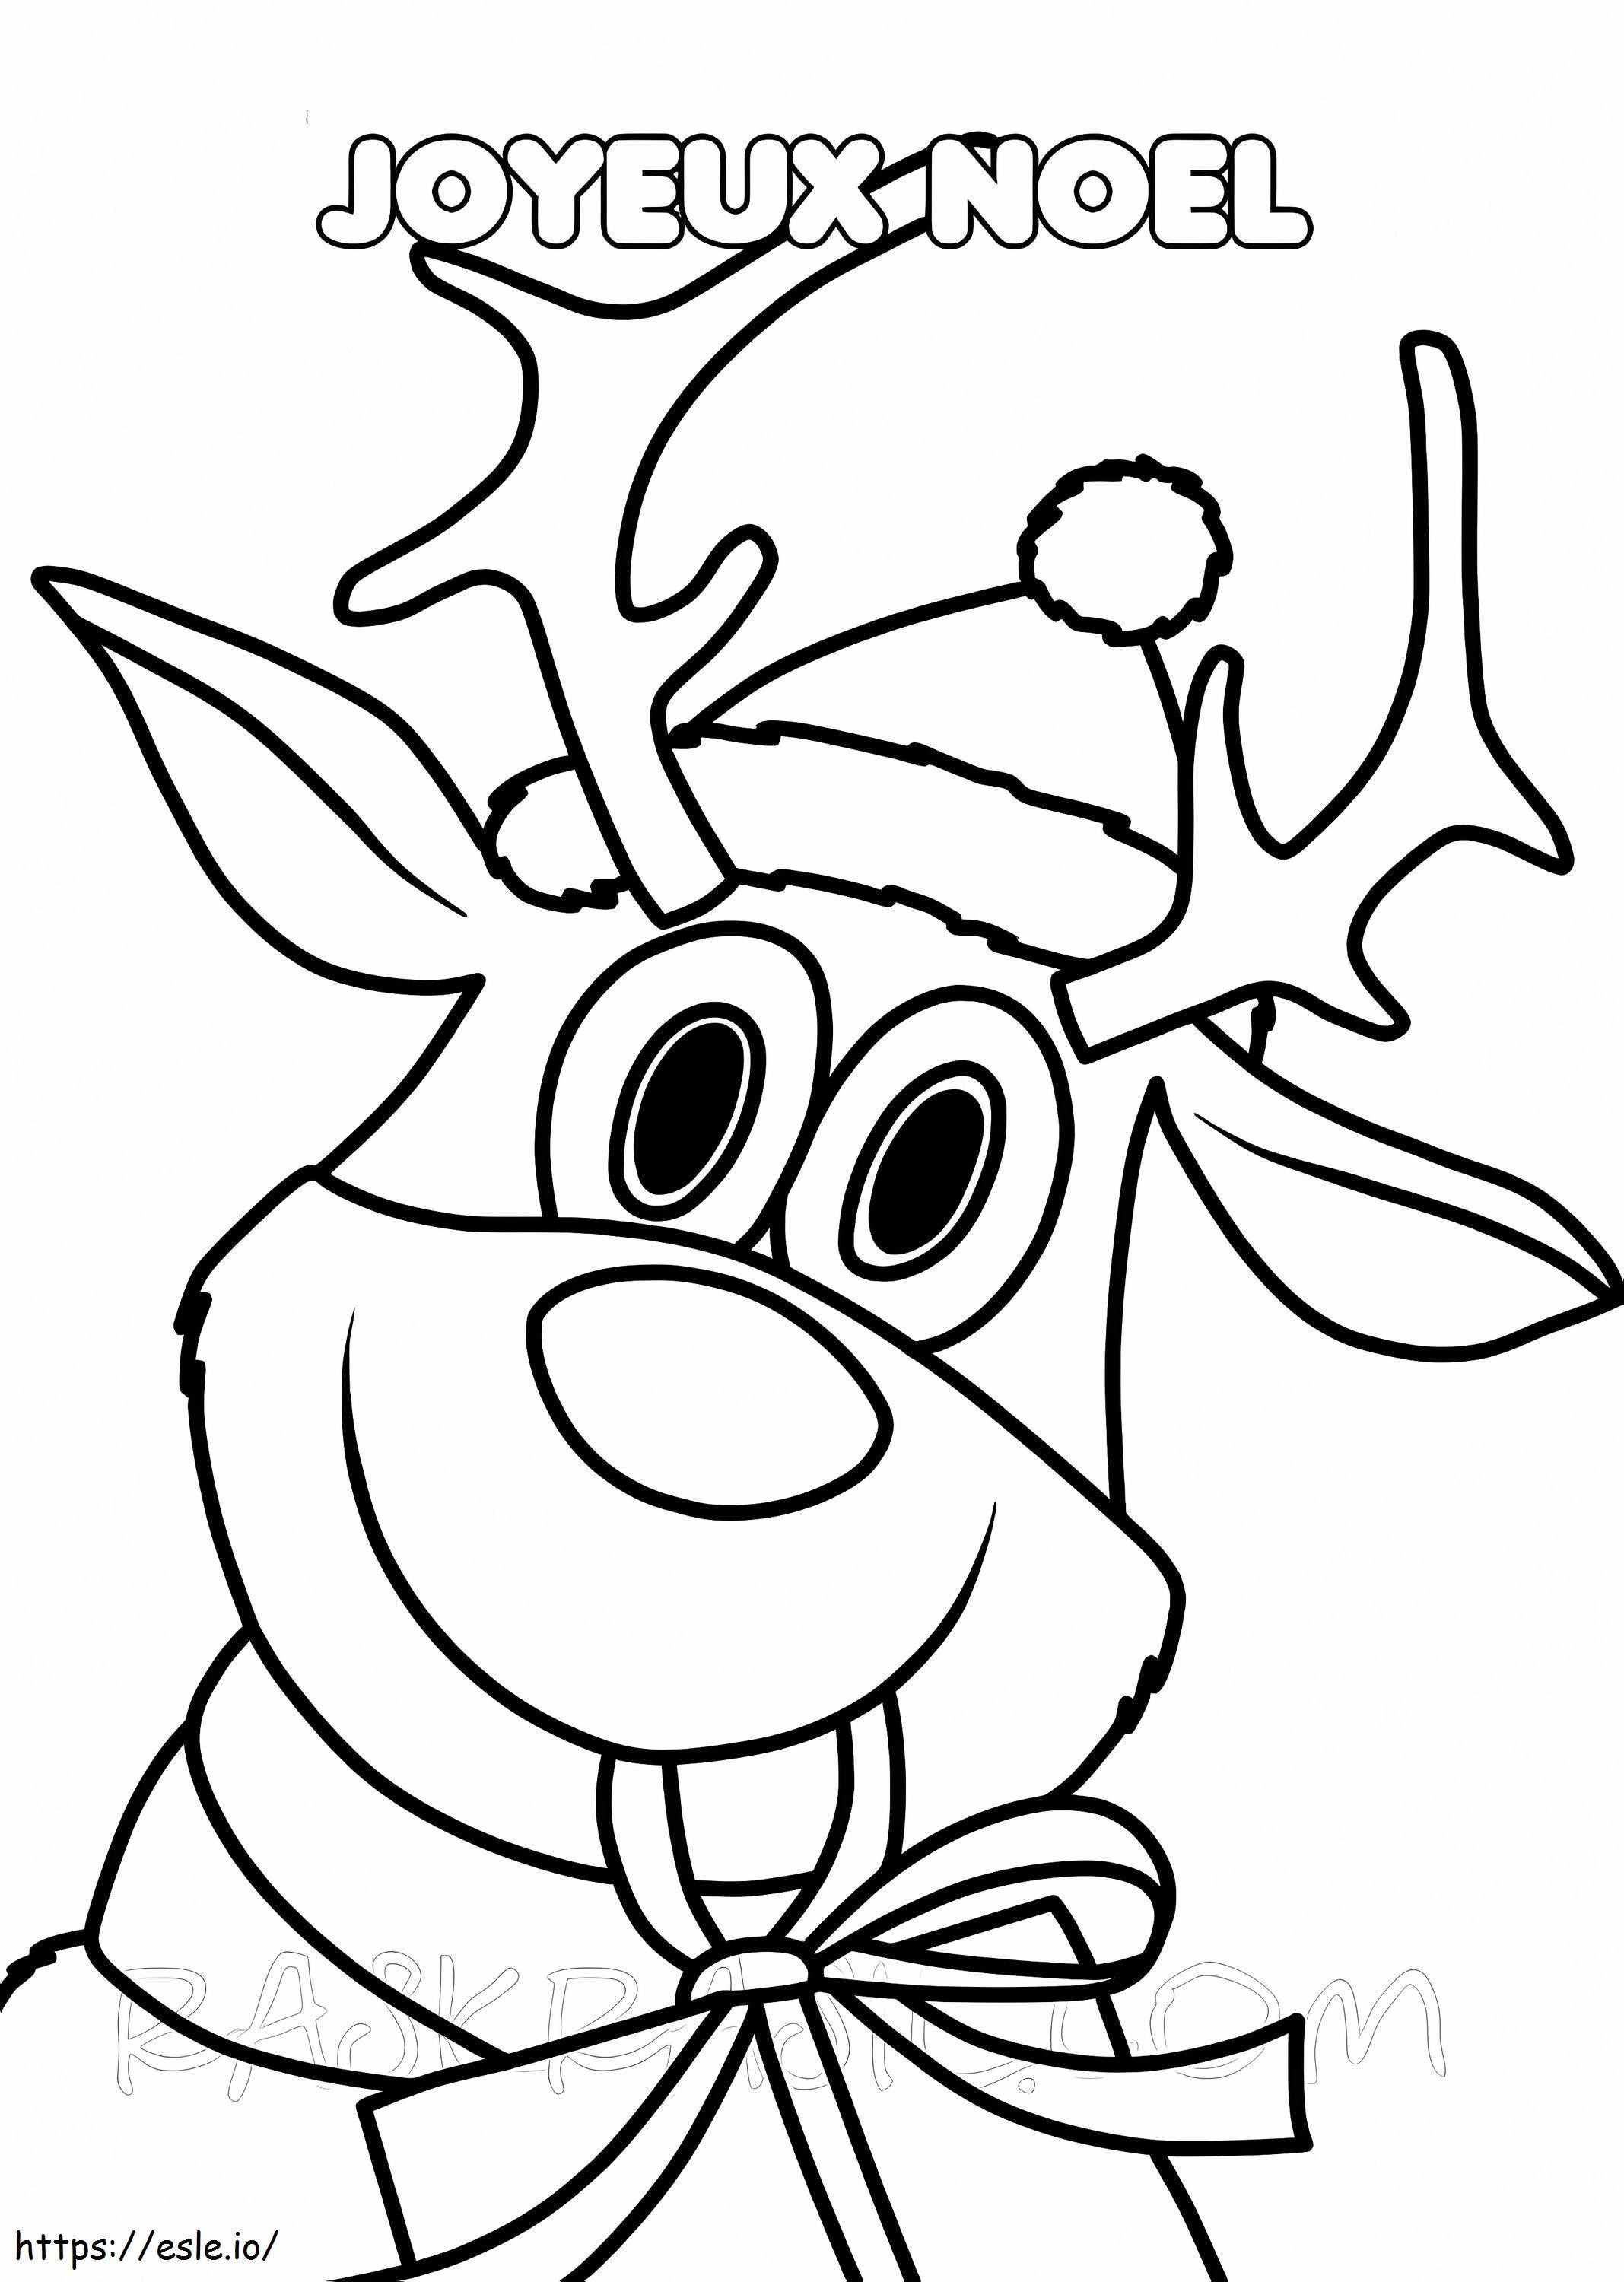 Merry Christmas 4 coloring page